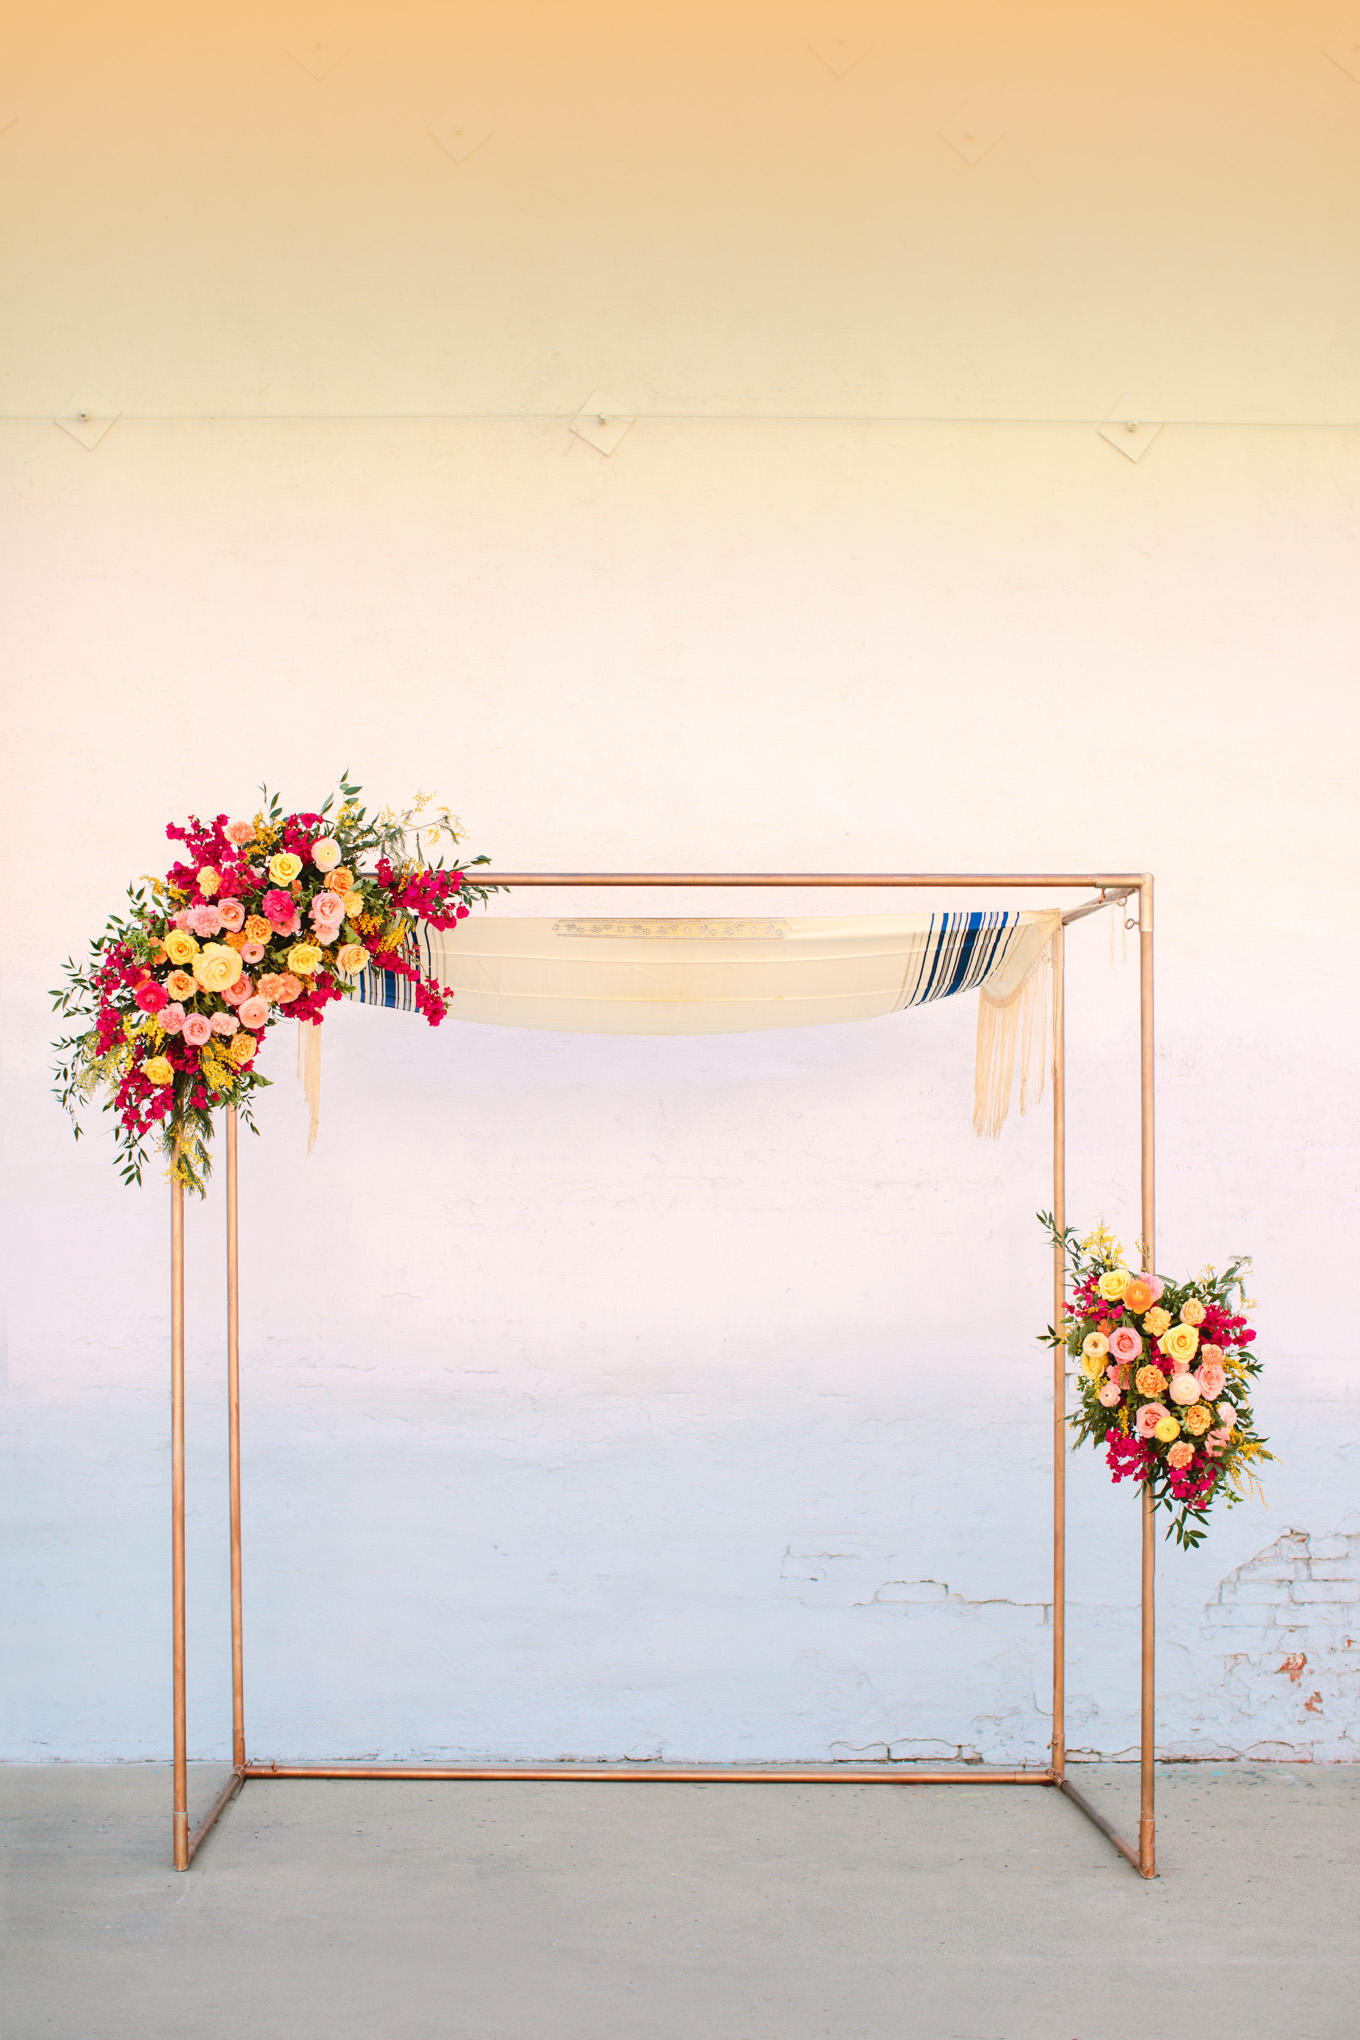 Copper rectangle ceremony arch | Colorful wedding at The Unique Space Los Angeles published in The Knot Magazine | Fresh and colorful photography for fun-loving couples in Southern California | #colorfulwedding #losangeleswedding #weddingphotography #uniquespace Source: Mary Costa Photography | Los Angeles